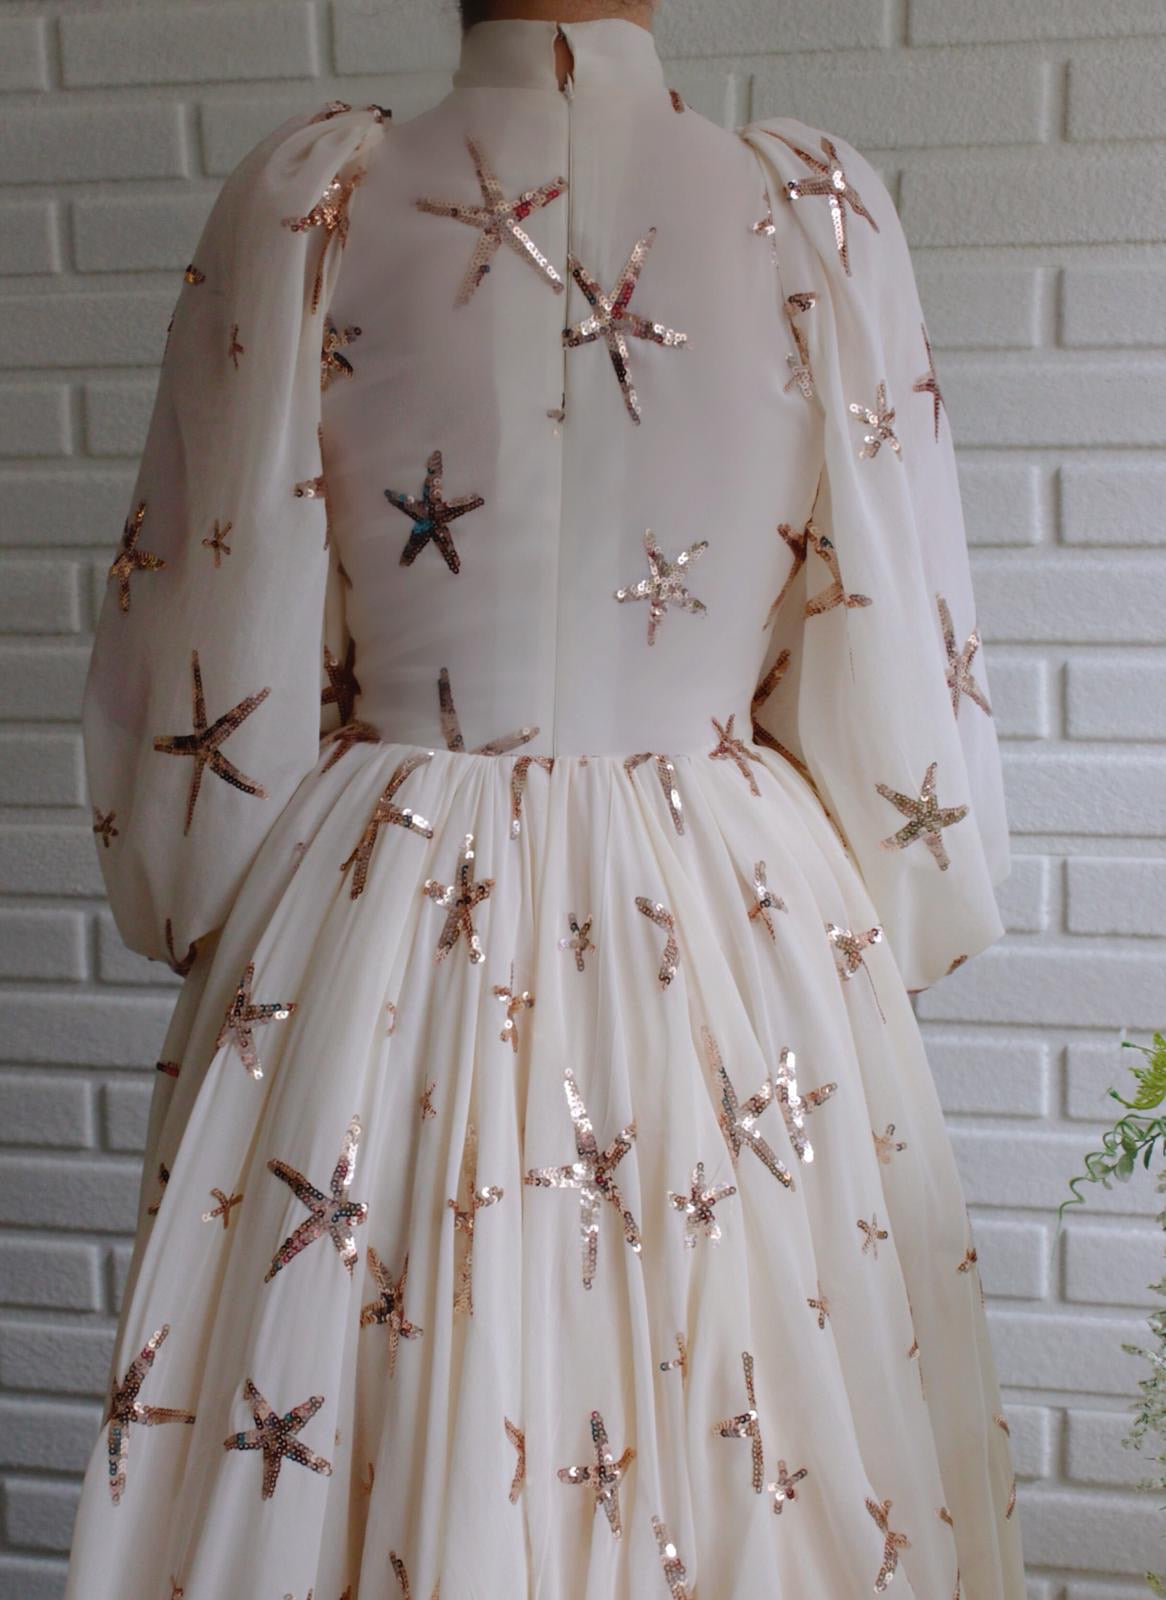 White A-Line dress with starry embroidery and long sleeves